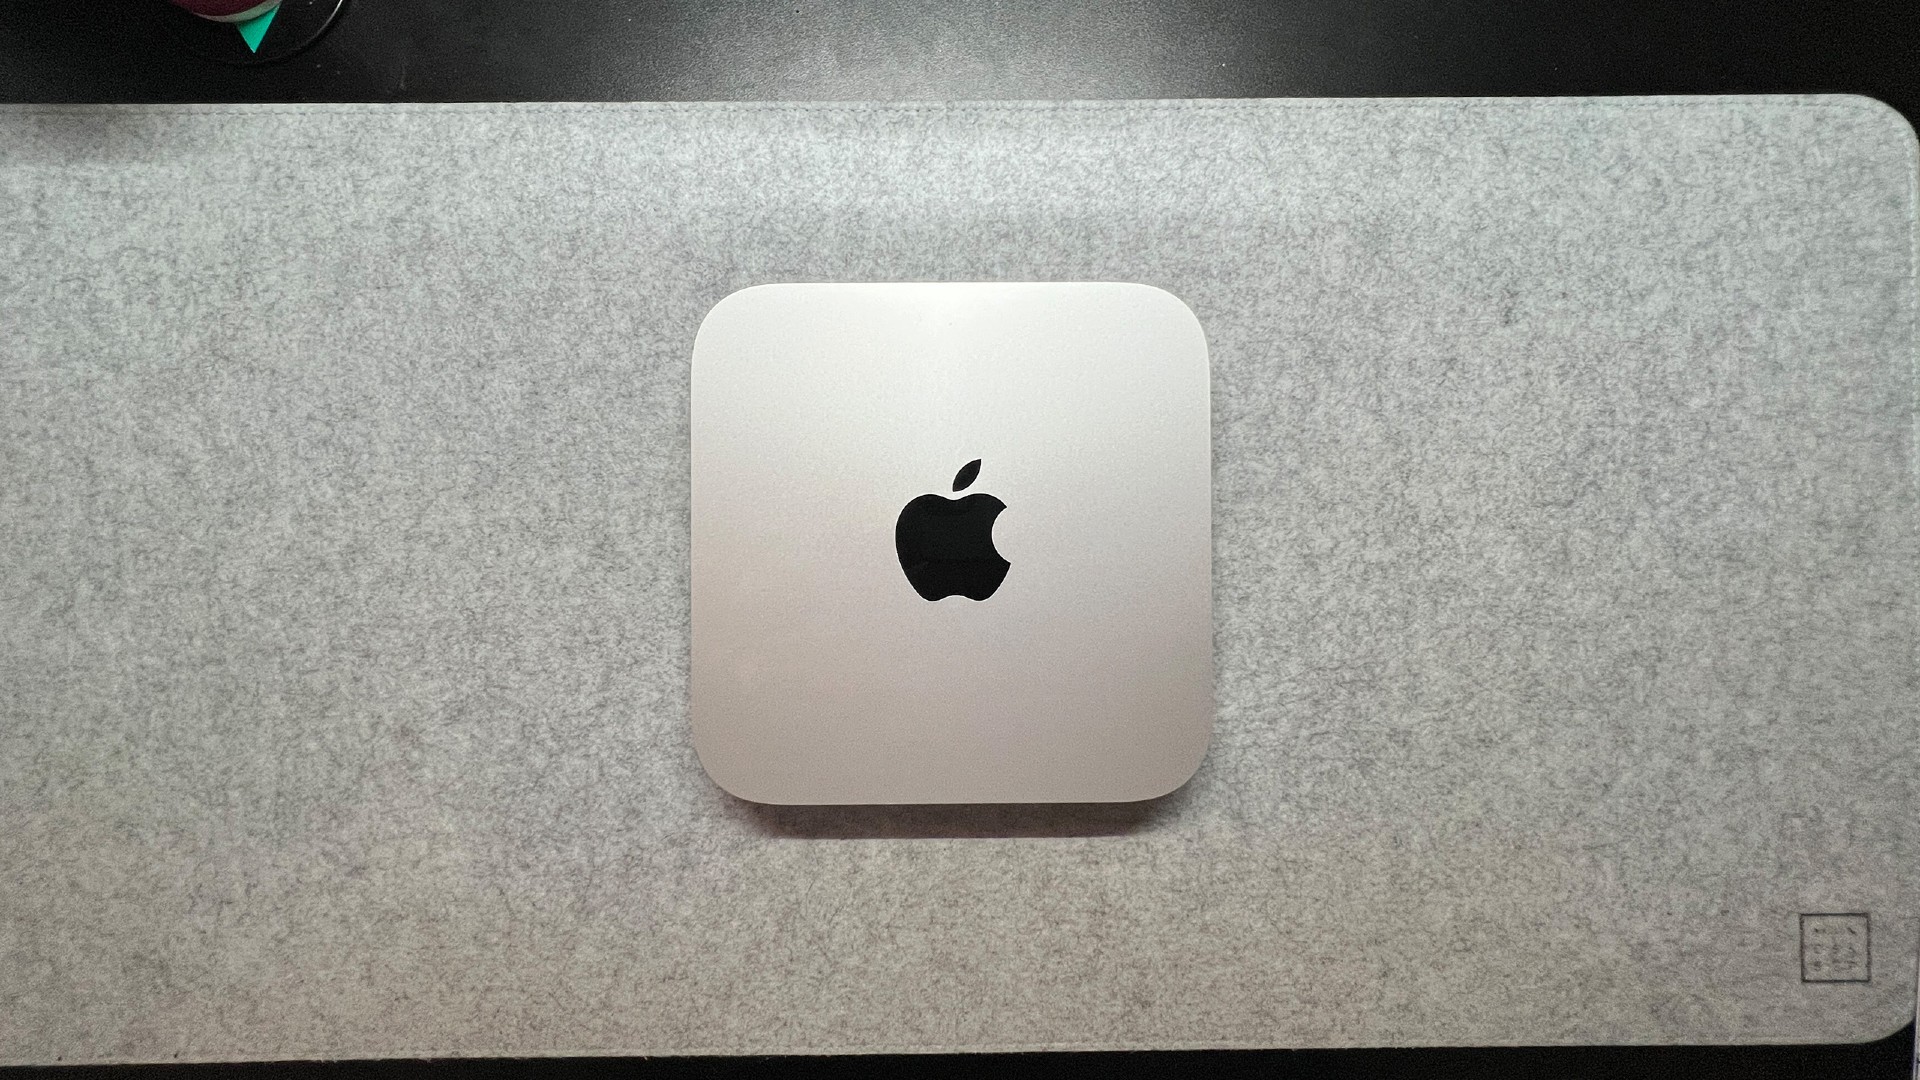 The Mac Mini Pro M2 is mini pc. It's a thin, square shape with rounded corners (20 x 20 x 3.5 cm). It's silver in color and has the Apple logo in the center of it (a black apple with a bite taken out of it). It is being displayed on a slightly darker gray computer desk mat.